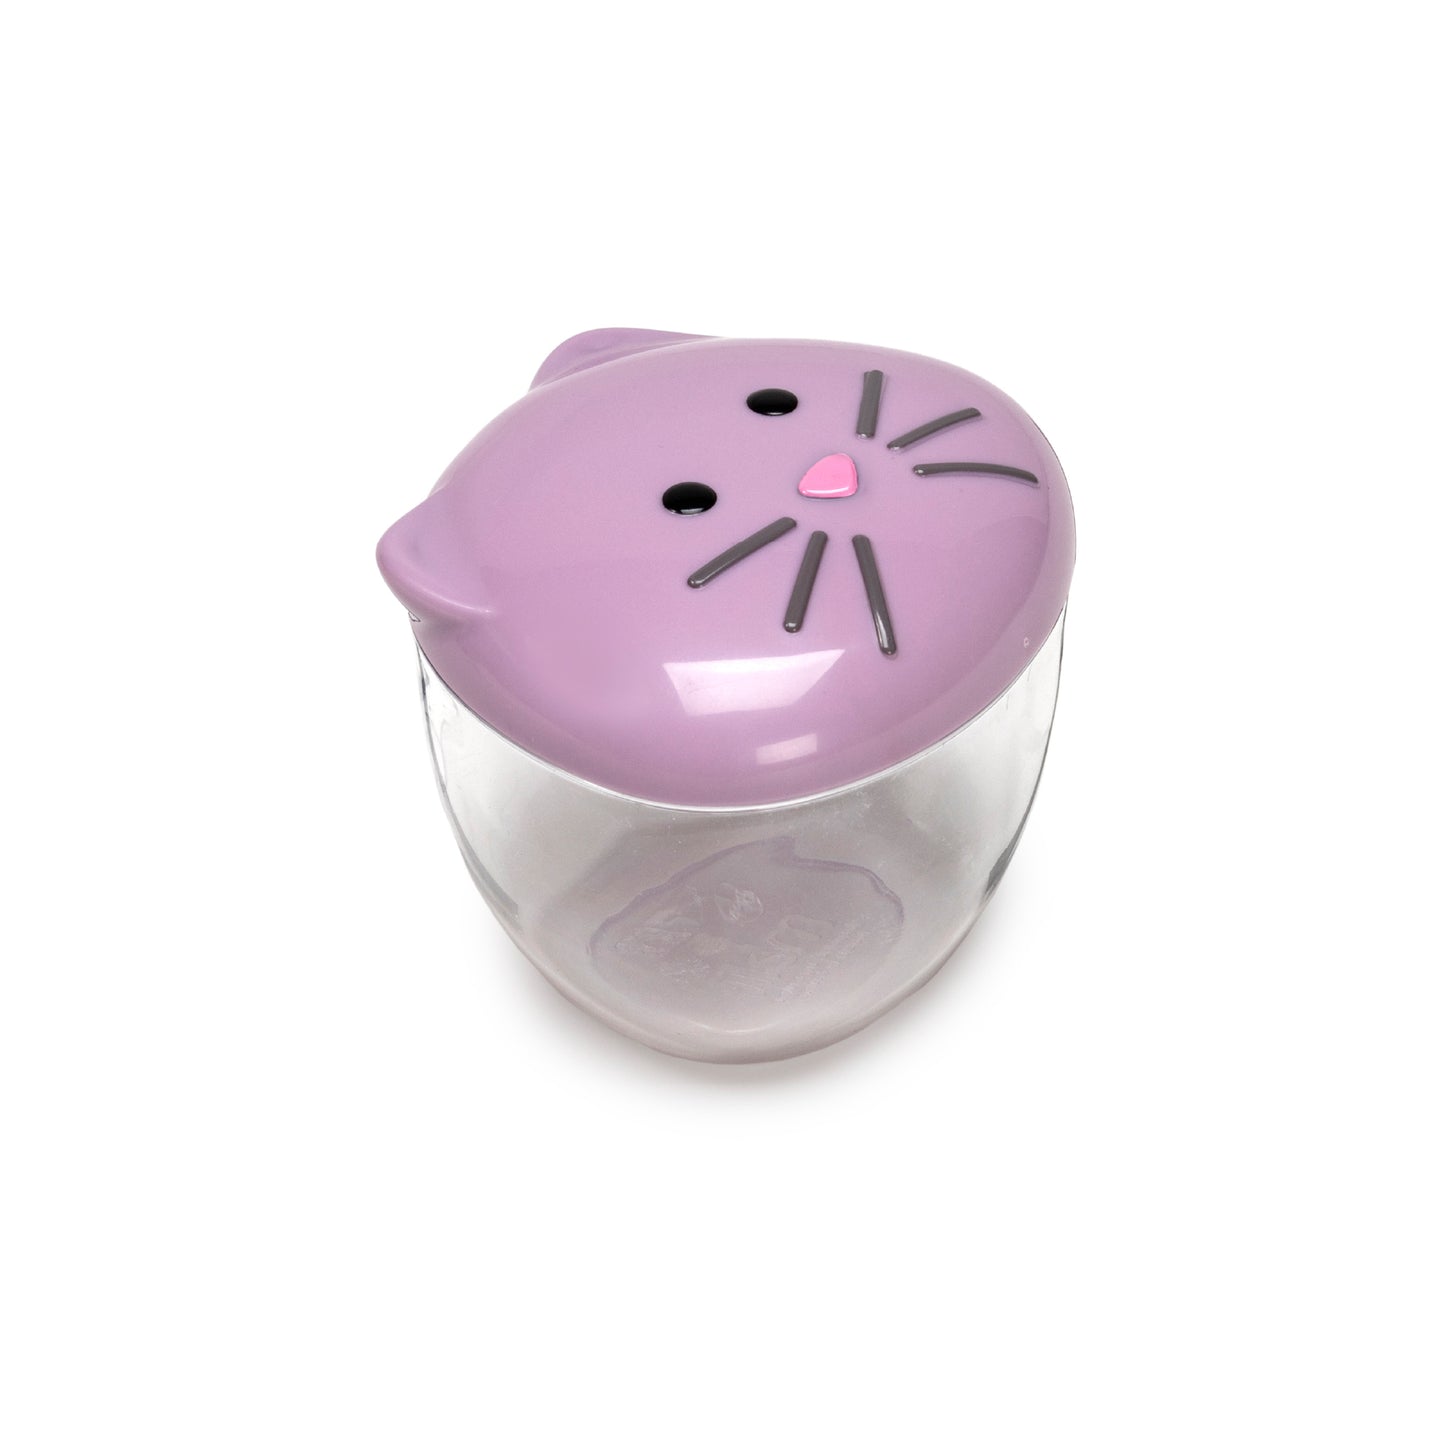 Melii Cat Snack Containers - Adorable, Airtight, and Leakproof Designs for Kids - BPA Free, Easy Clean, Perfect for On the Go Snacking and Lunch Boxes